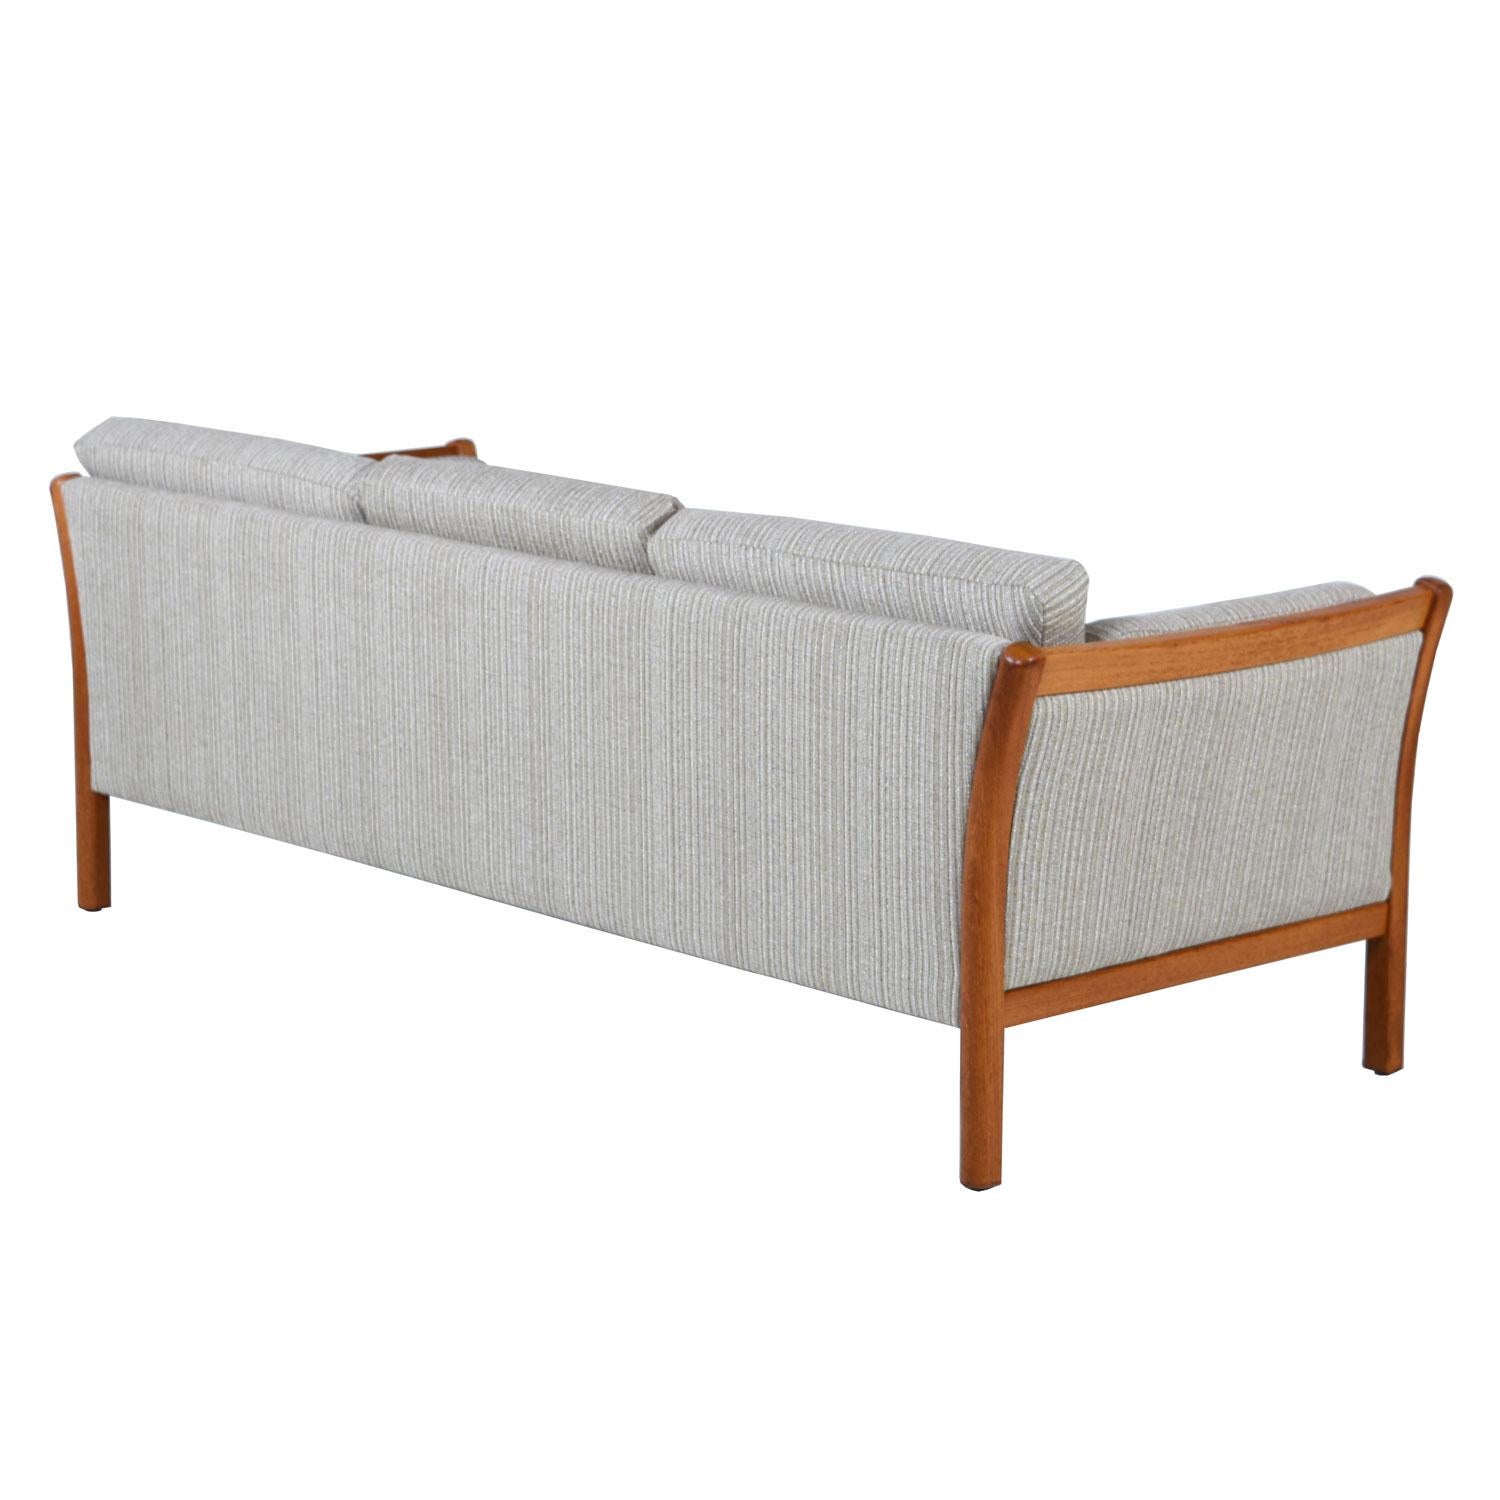 Super comfortable, fully restored, Danish modern teak Stouby sofa. Still doing business after over 100 years, Stouby’s Scandinavian quality rings true in the design of these chairs. Frames constructed of bent, teak wood. Masterfully engineered to